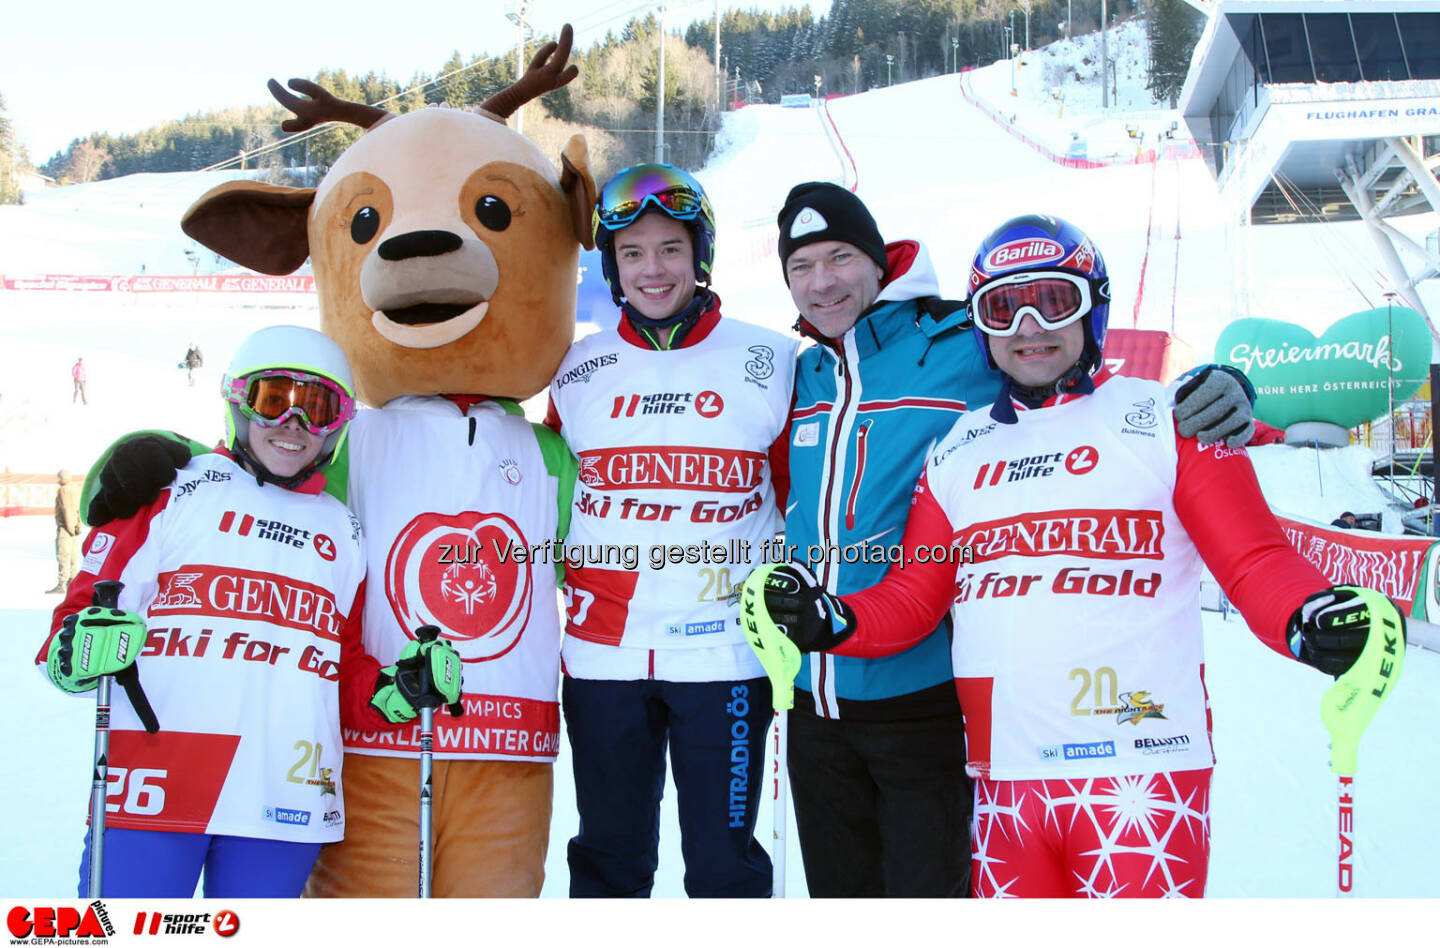 Ski for Gold Charity Race. Image shows Ricarda Huber, mascot Luis, Philipp Hansa, mayor Juergen Winter (Schladming) and Thomas Praxmarer. Keywords: Special Olympics World Winter Games, SOWWG Austria 2017 preview. Photo: GEPA pictures/ Harald Steiner